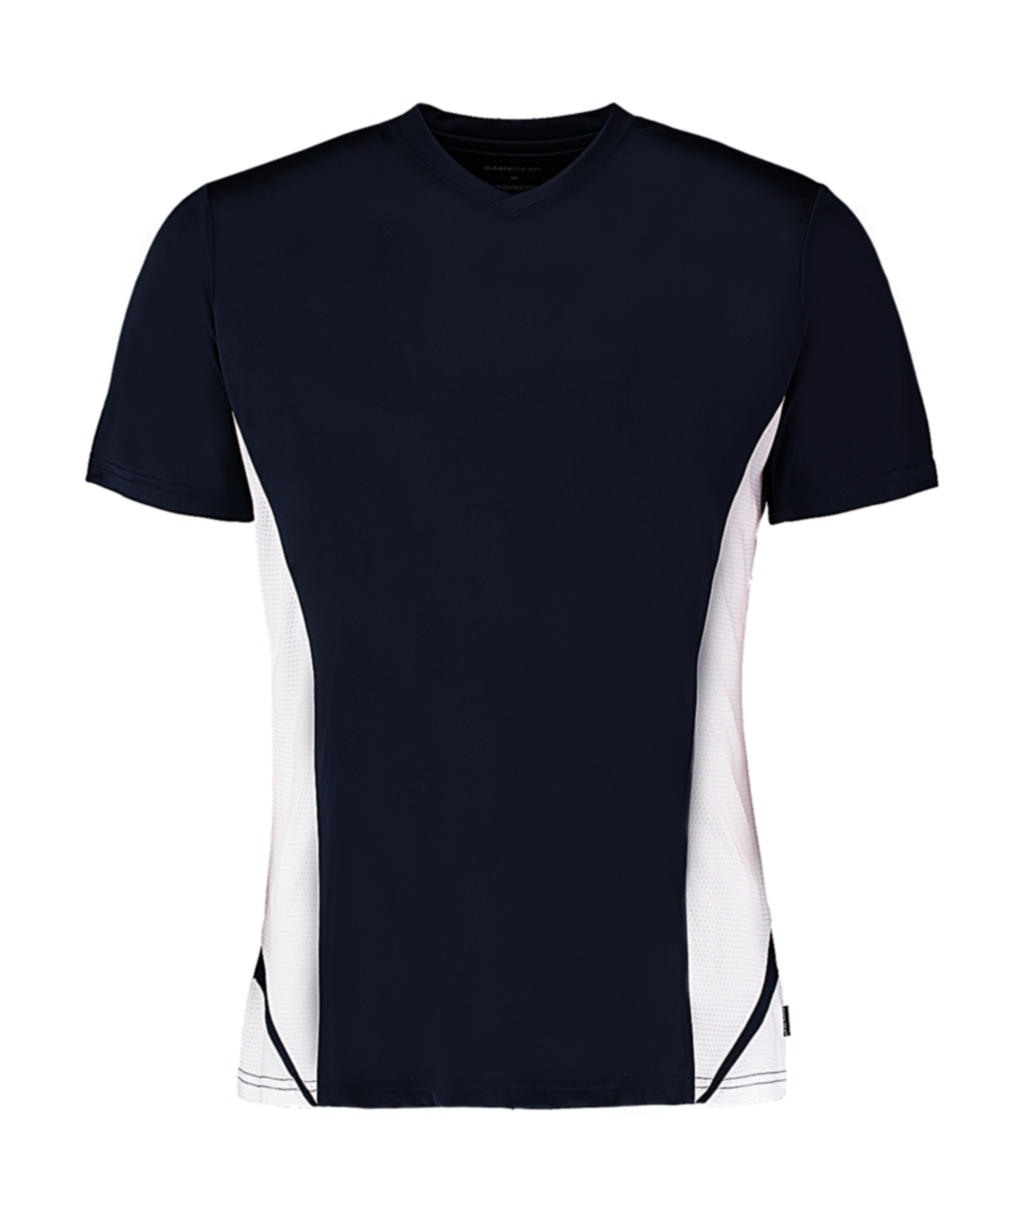  Regular Fit Cooltex? Panel V Neck Tee in Farbe Navy/White